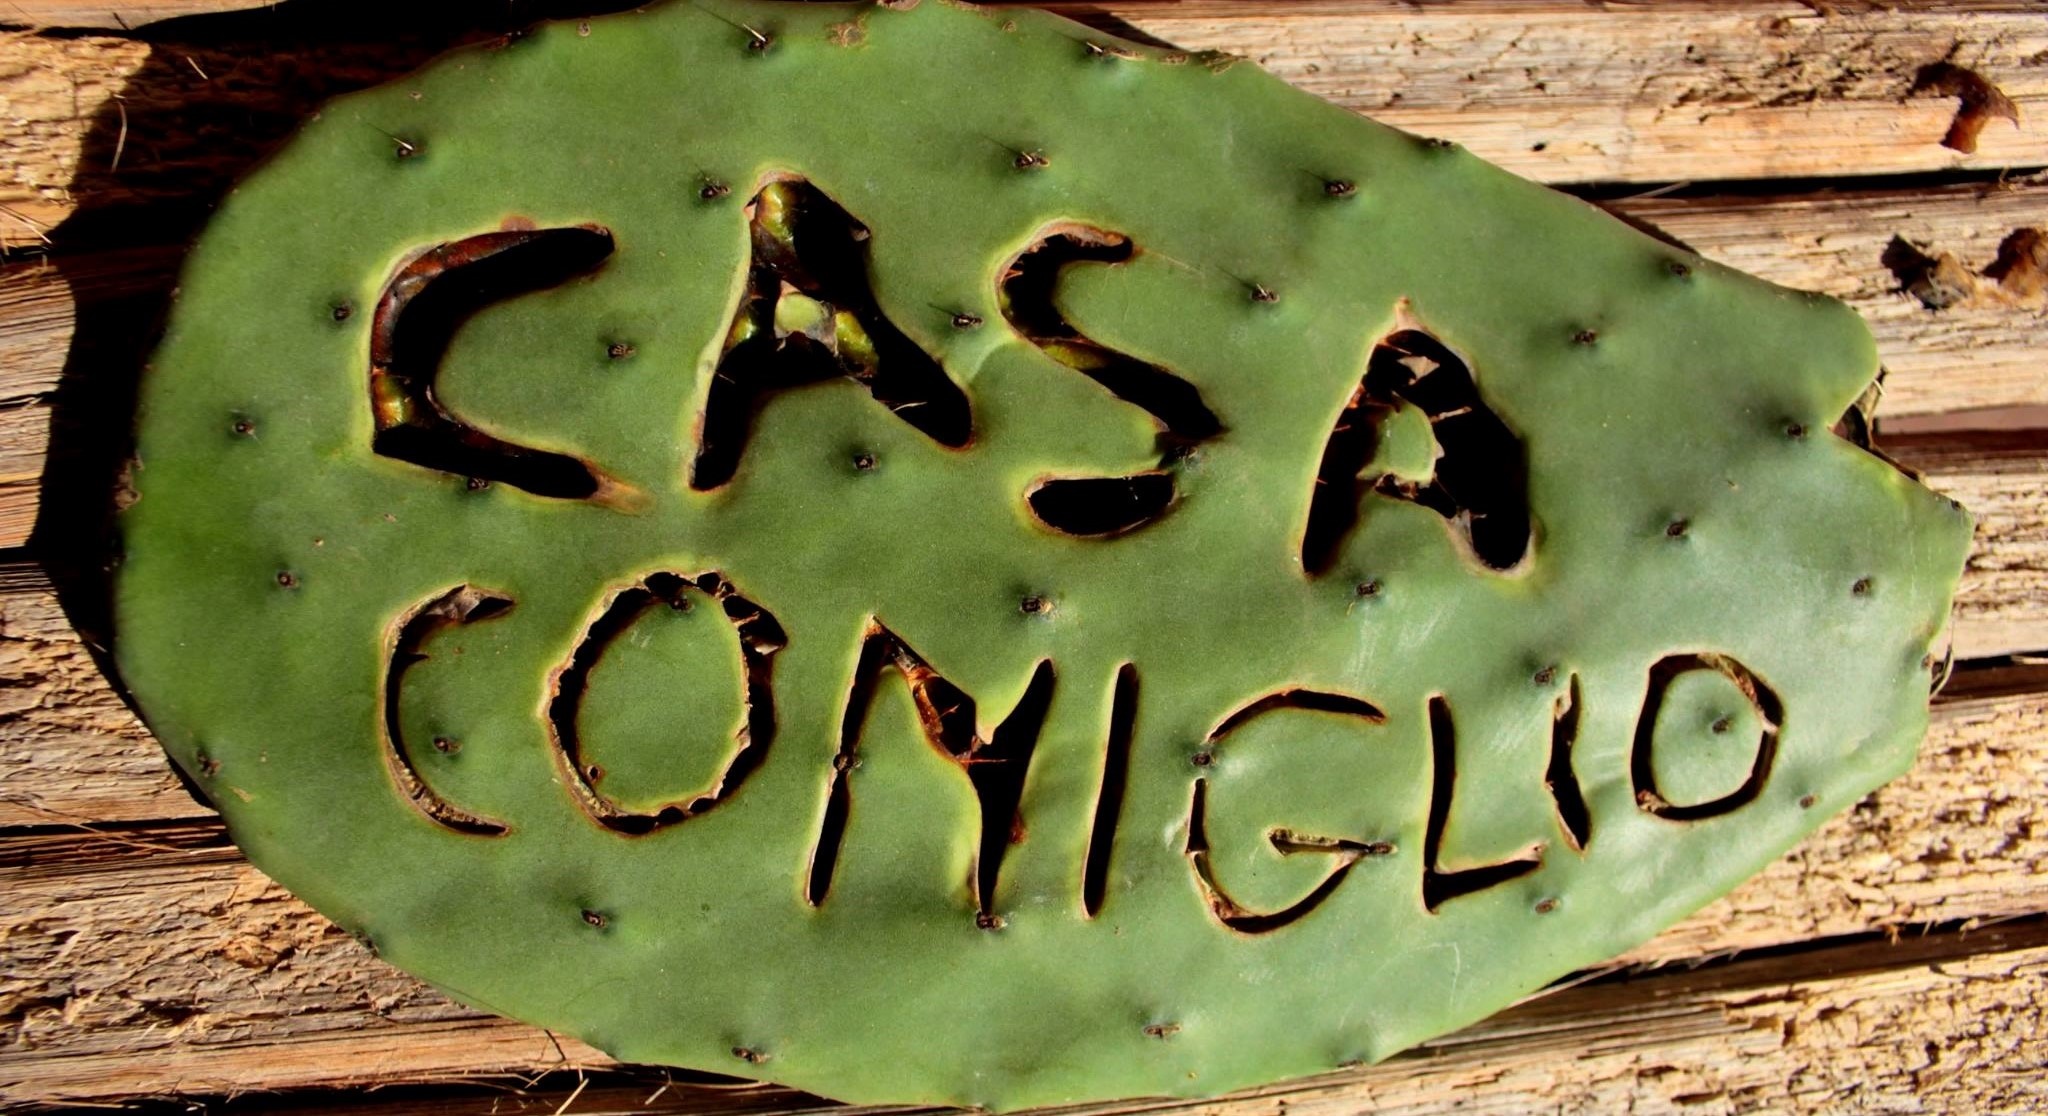 Cactus leaf with name written on it